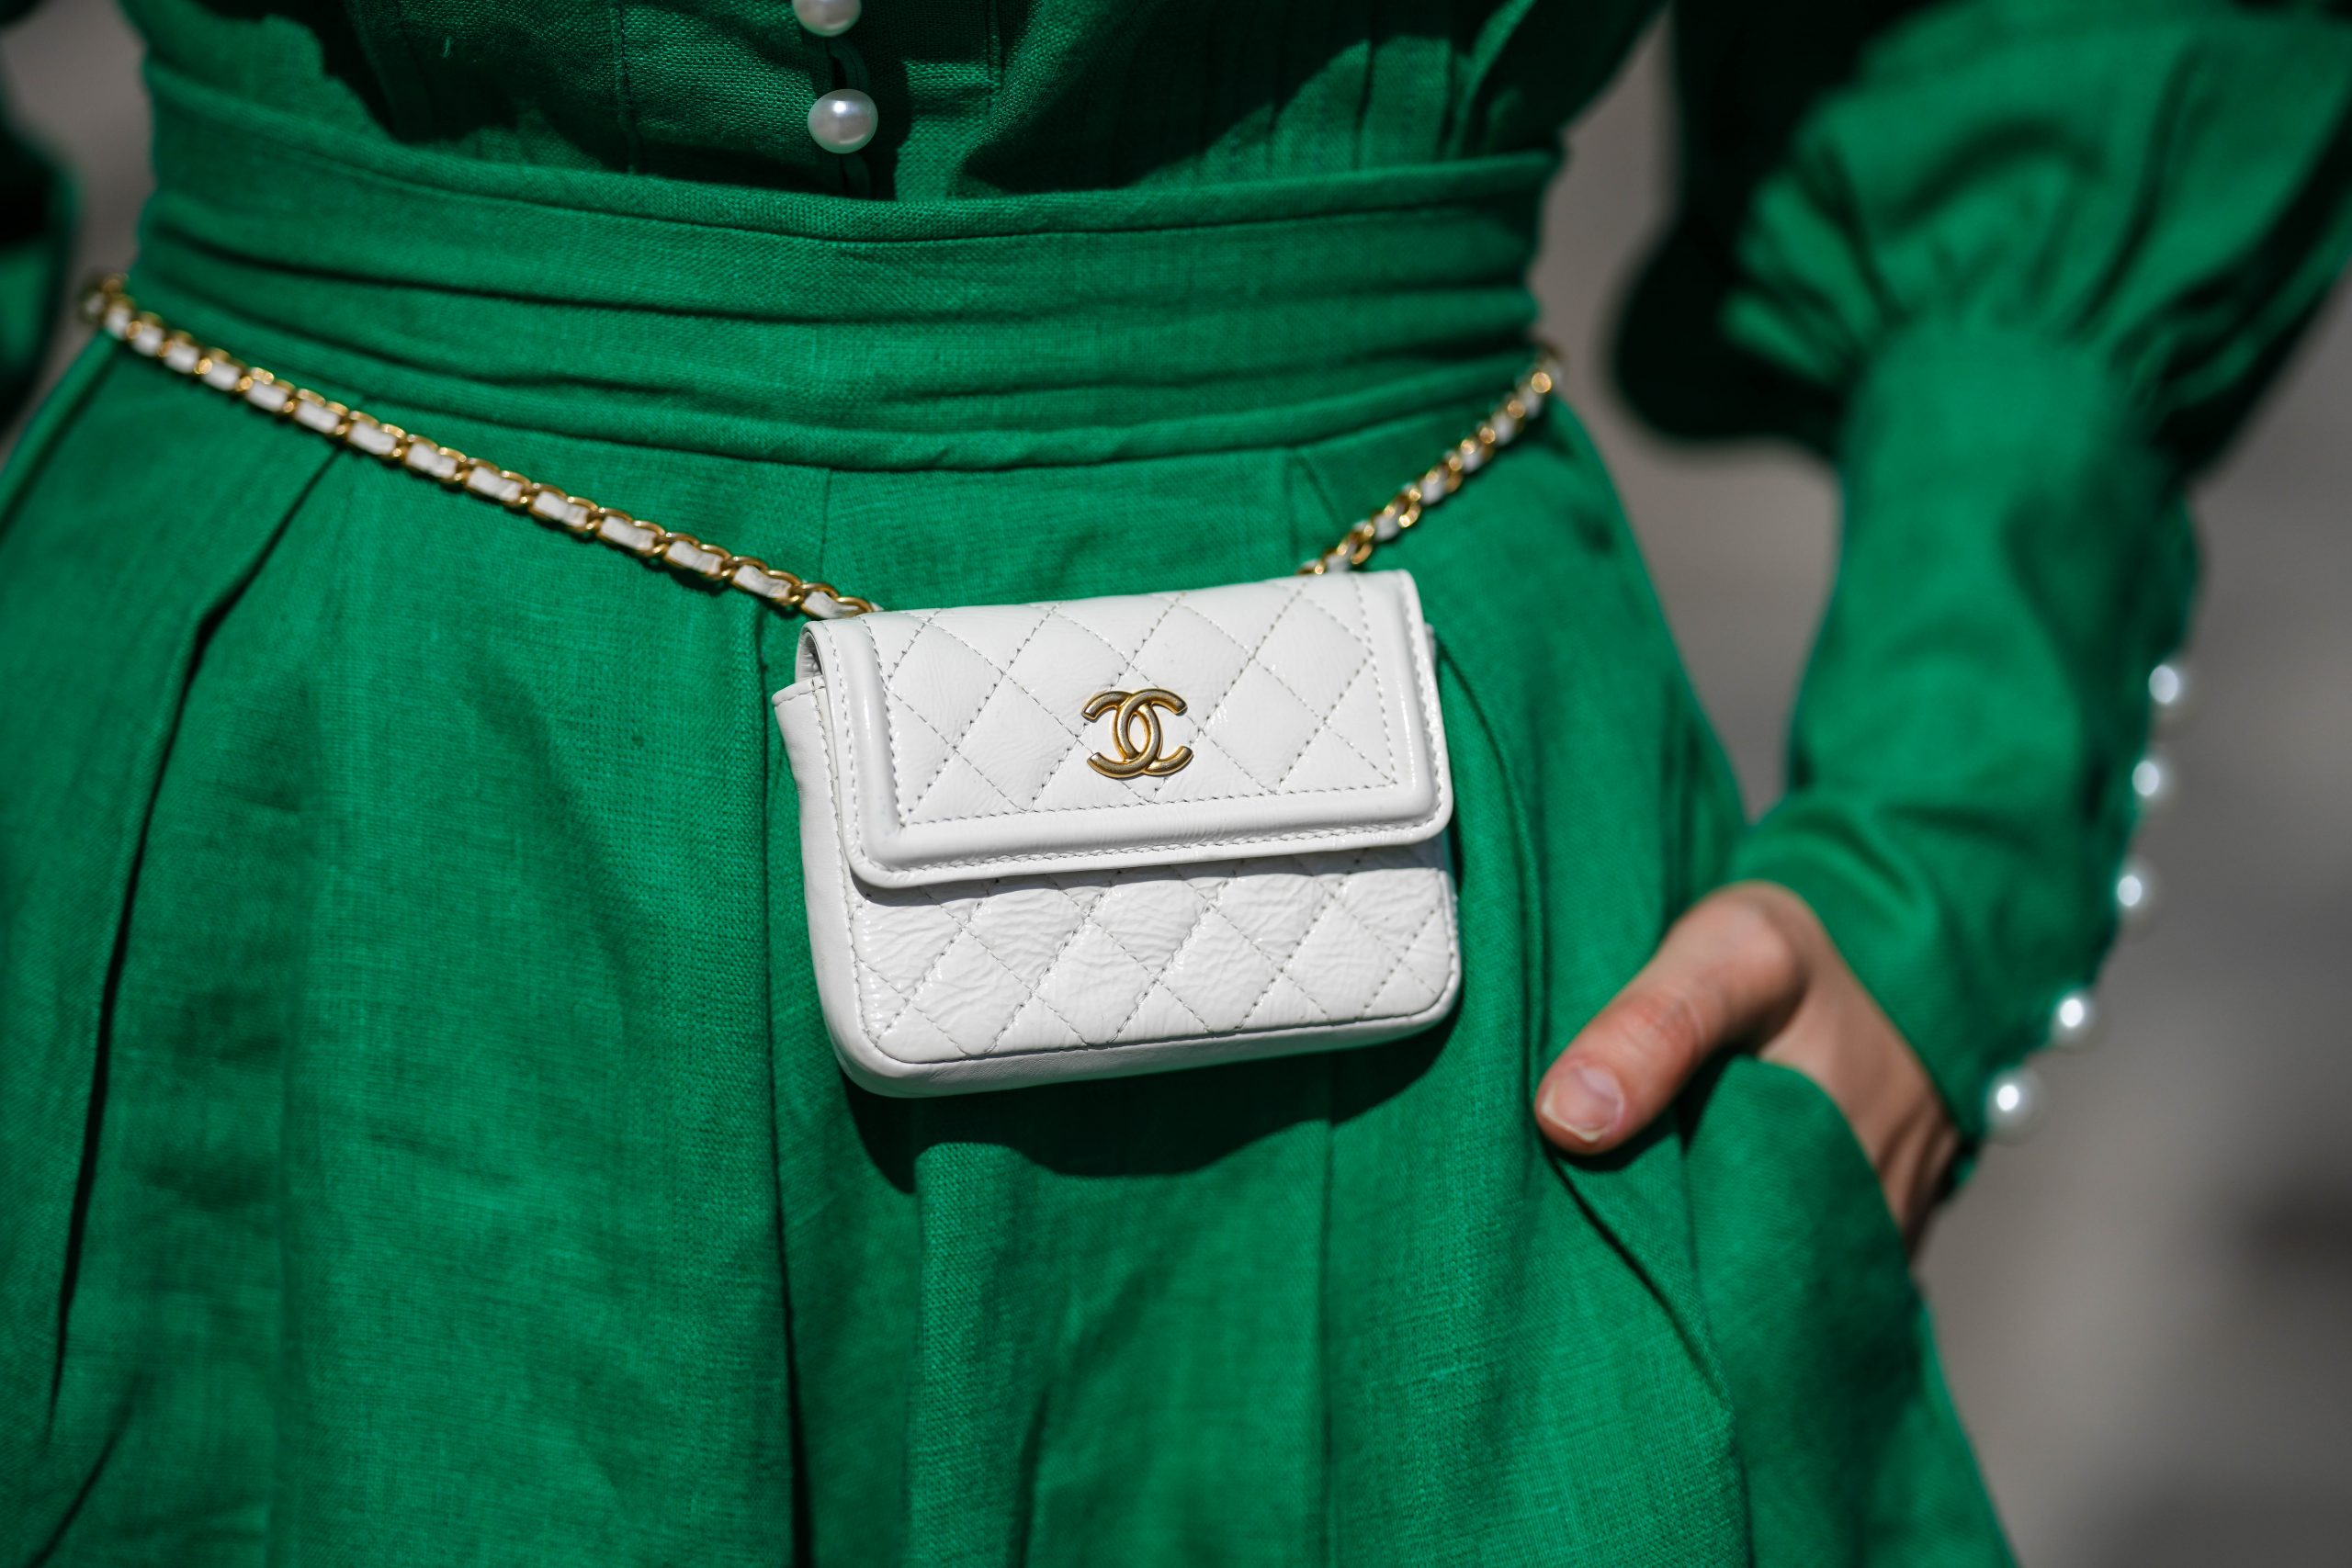 Chanel bags: are they worth it and where to buy the best ones